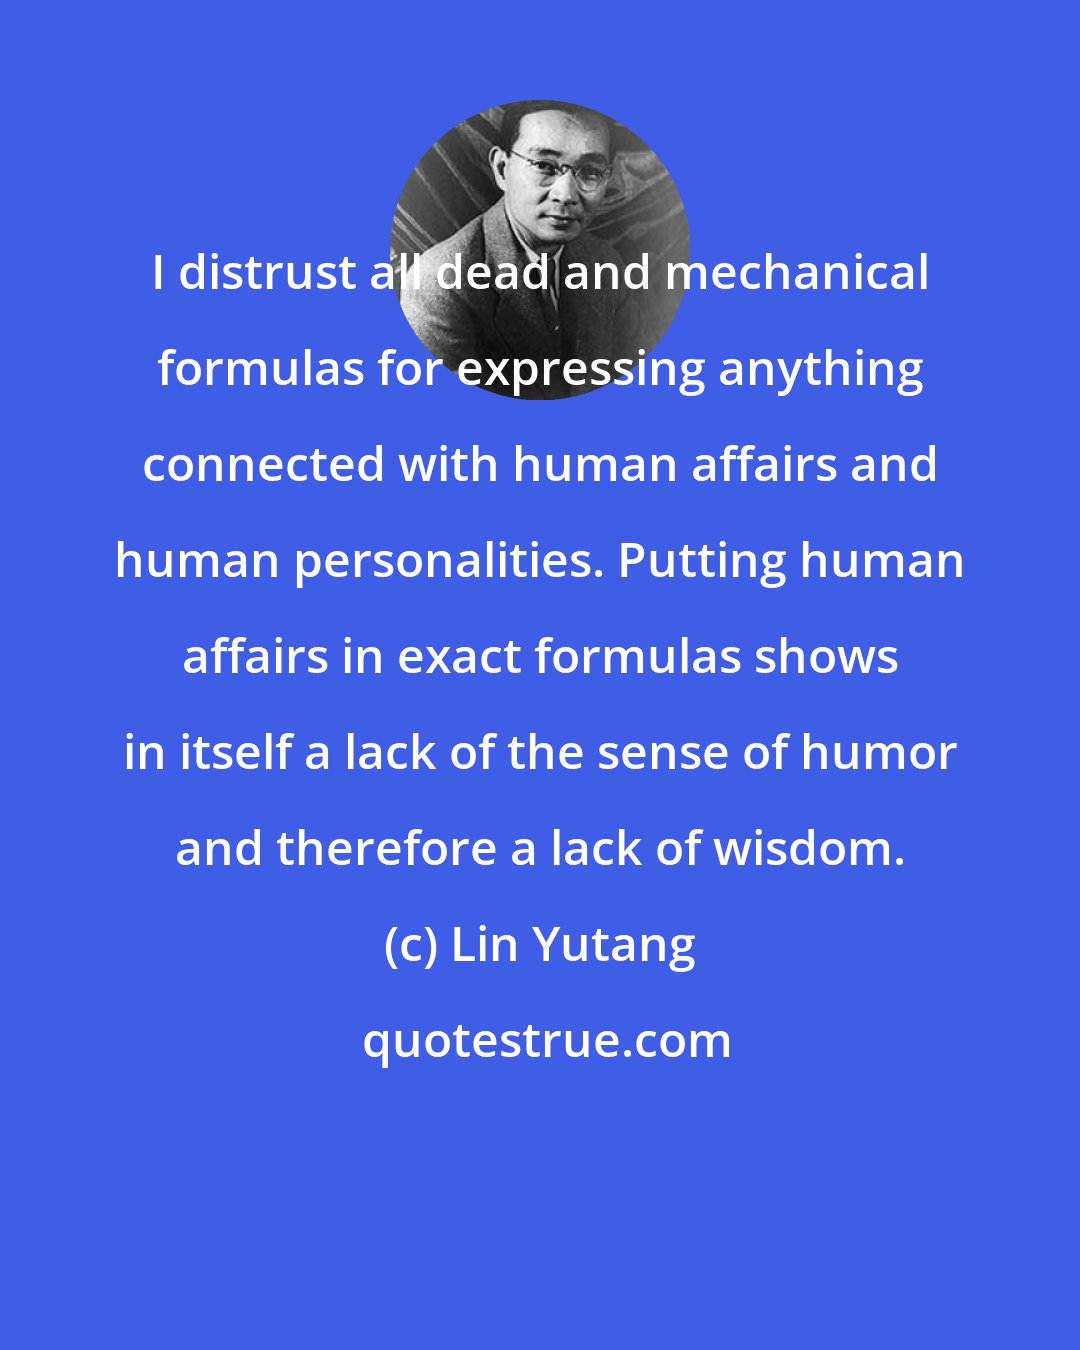 Lin Yutang: I distrust all dead and mechanical formulas for expressing anything connected with human affairs and human personalities. Putting human affairs in exact formulas shows in itself a lack of the sense of humor and therefore a lack of wisdom.